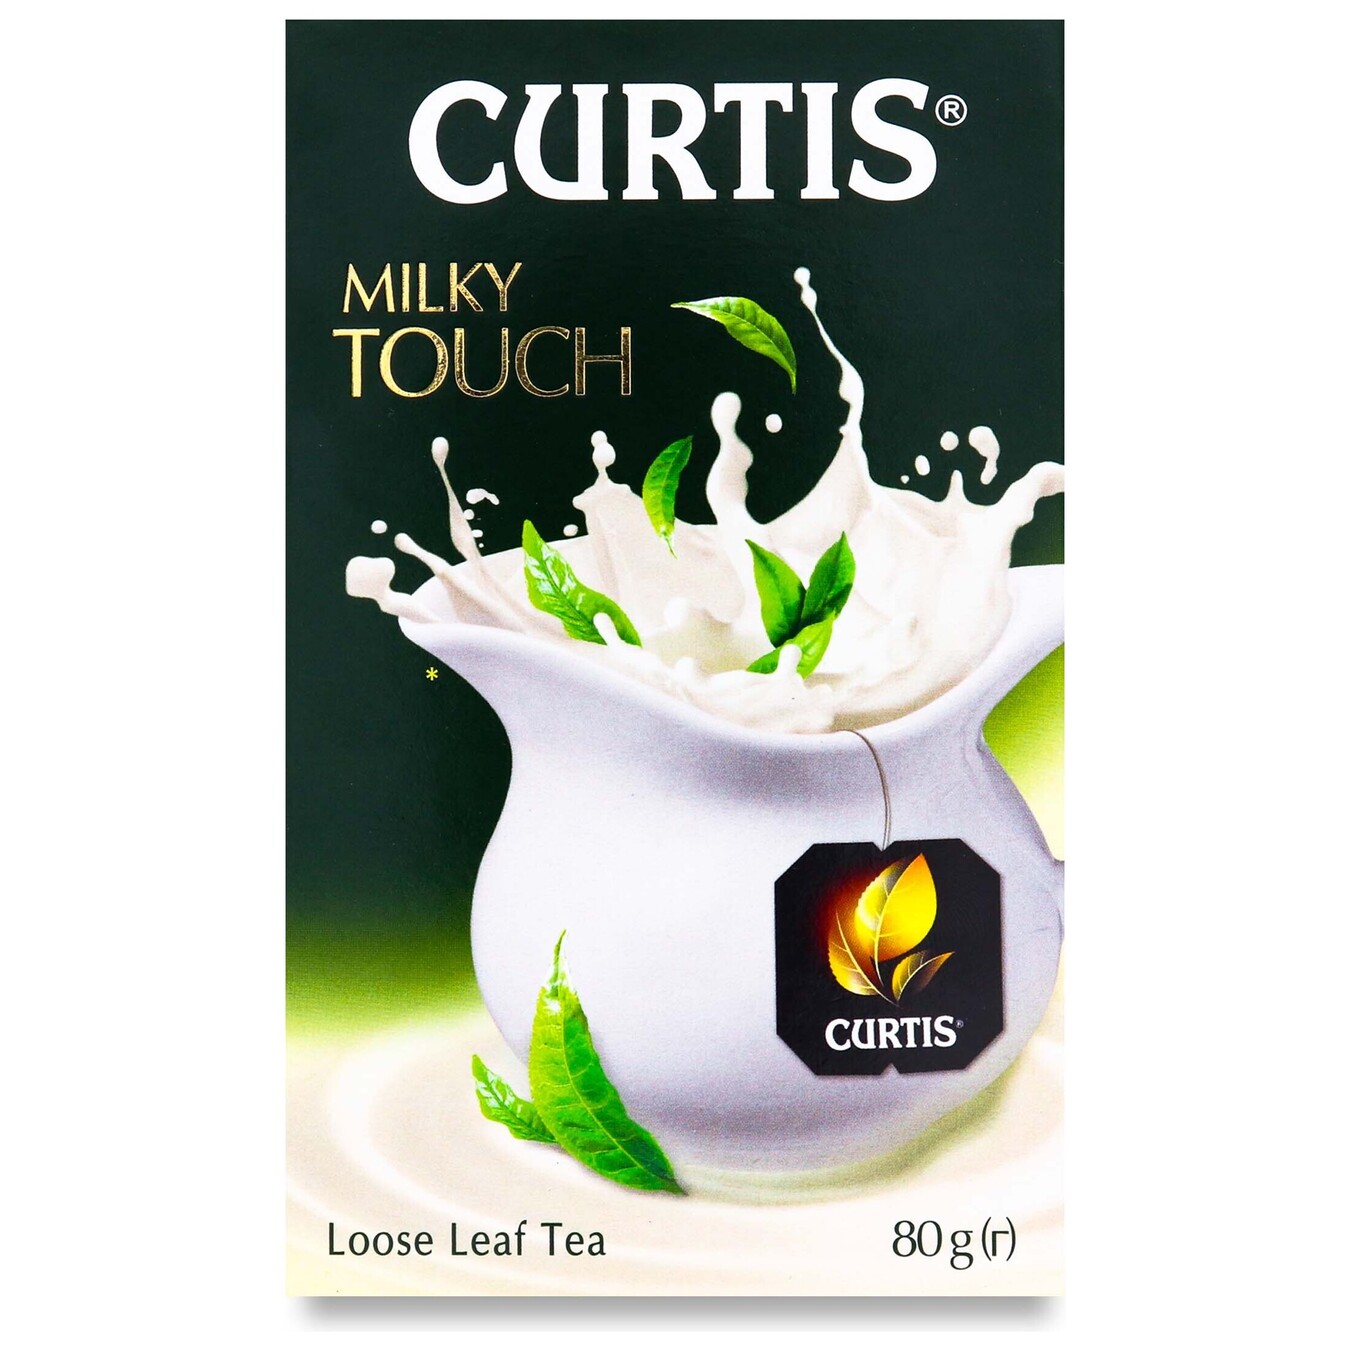 Oolong tea Curtis Milky Touch flavored 80 g